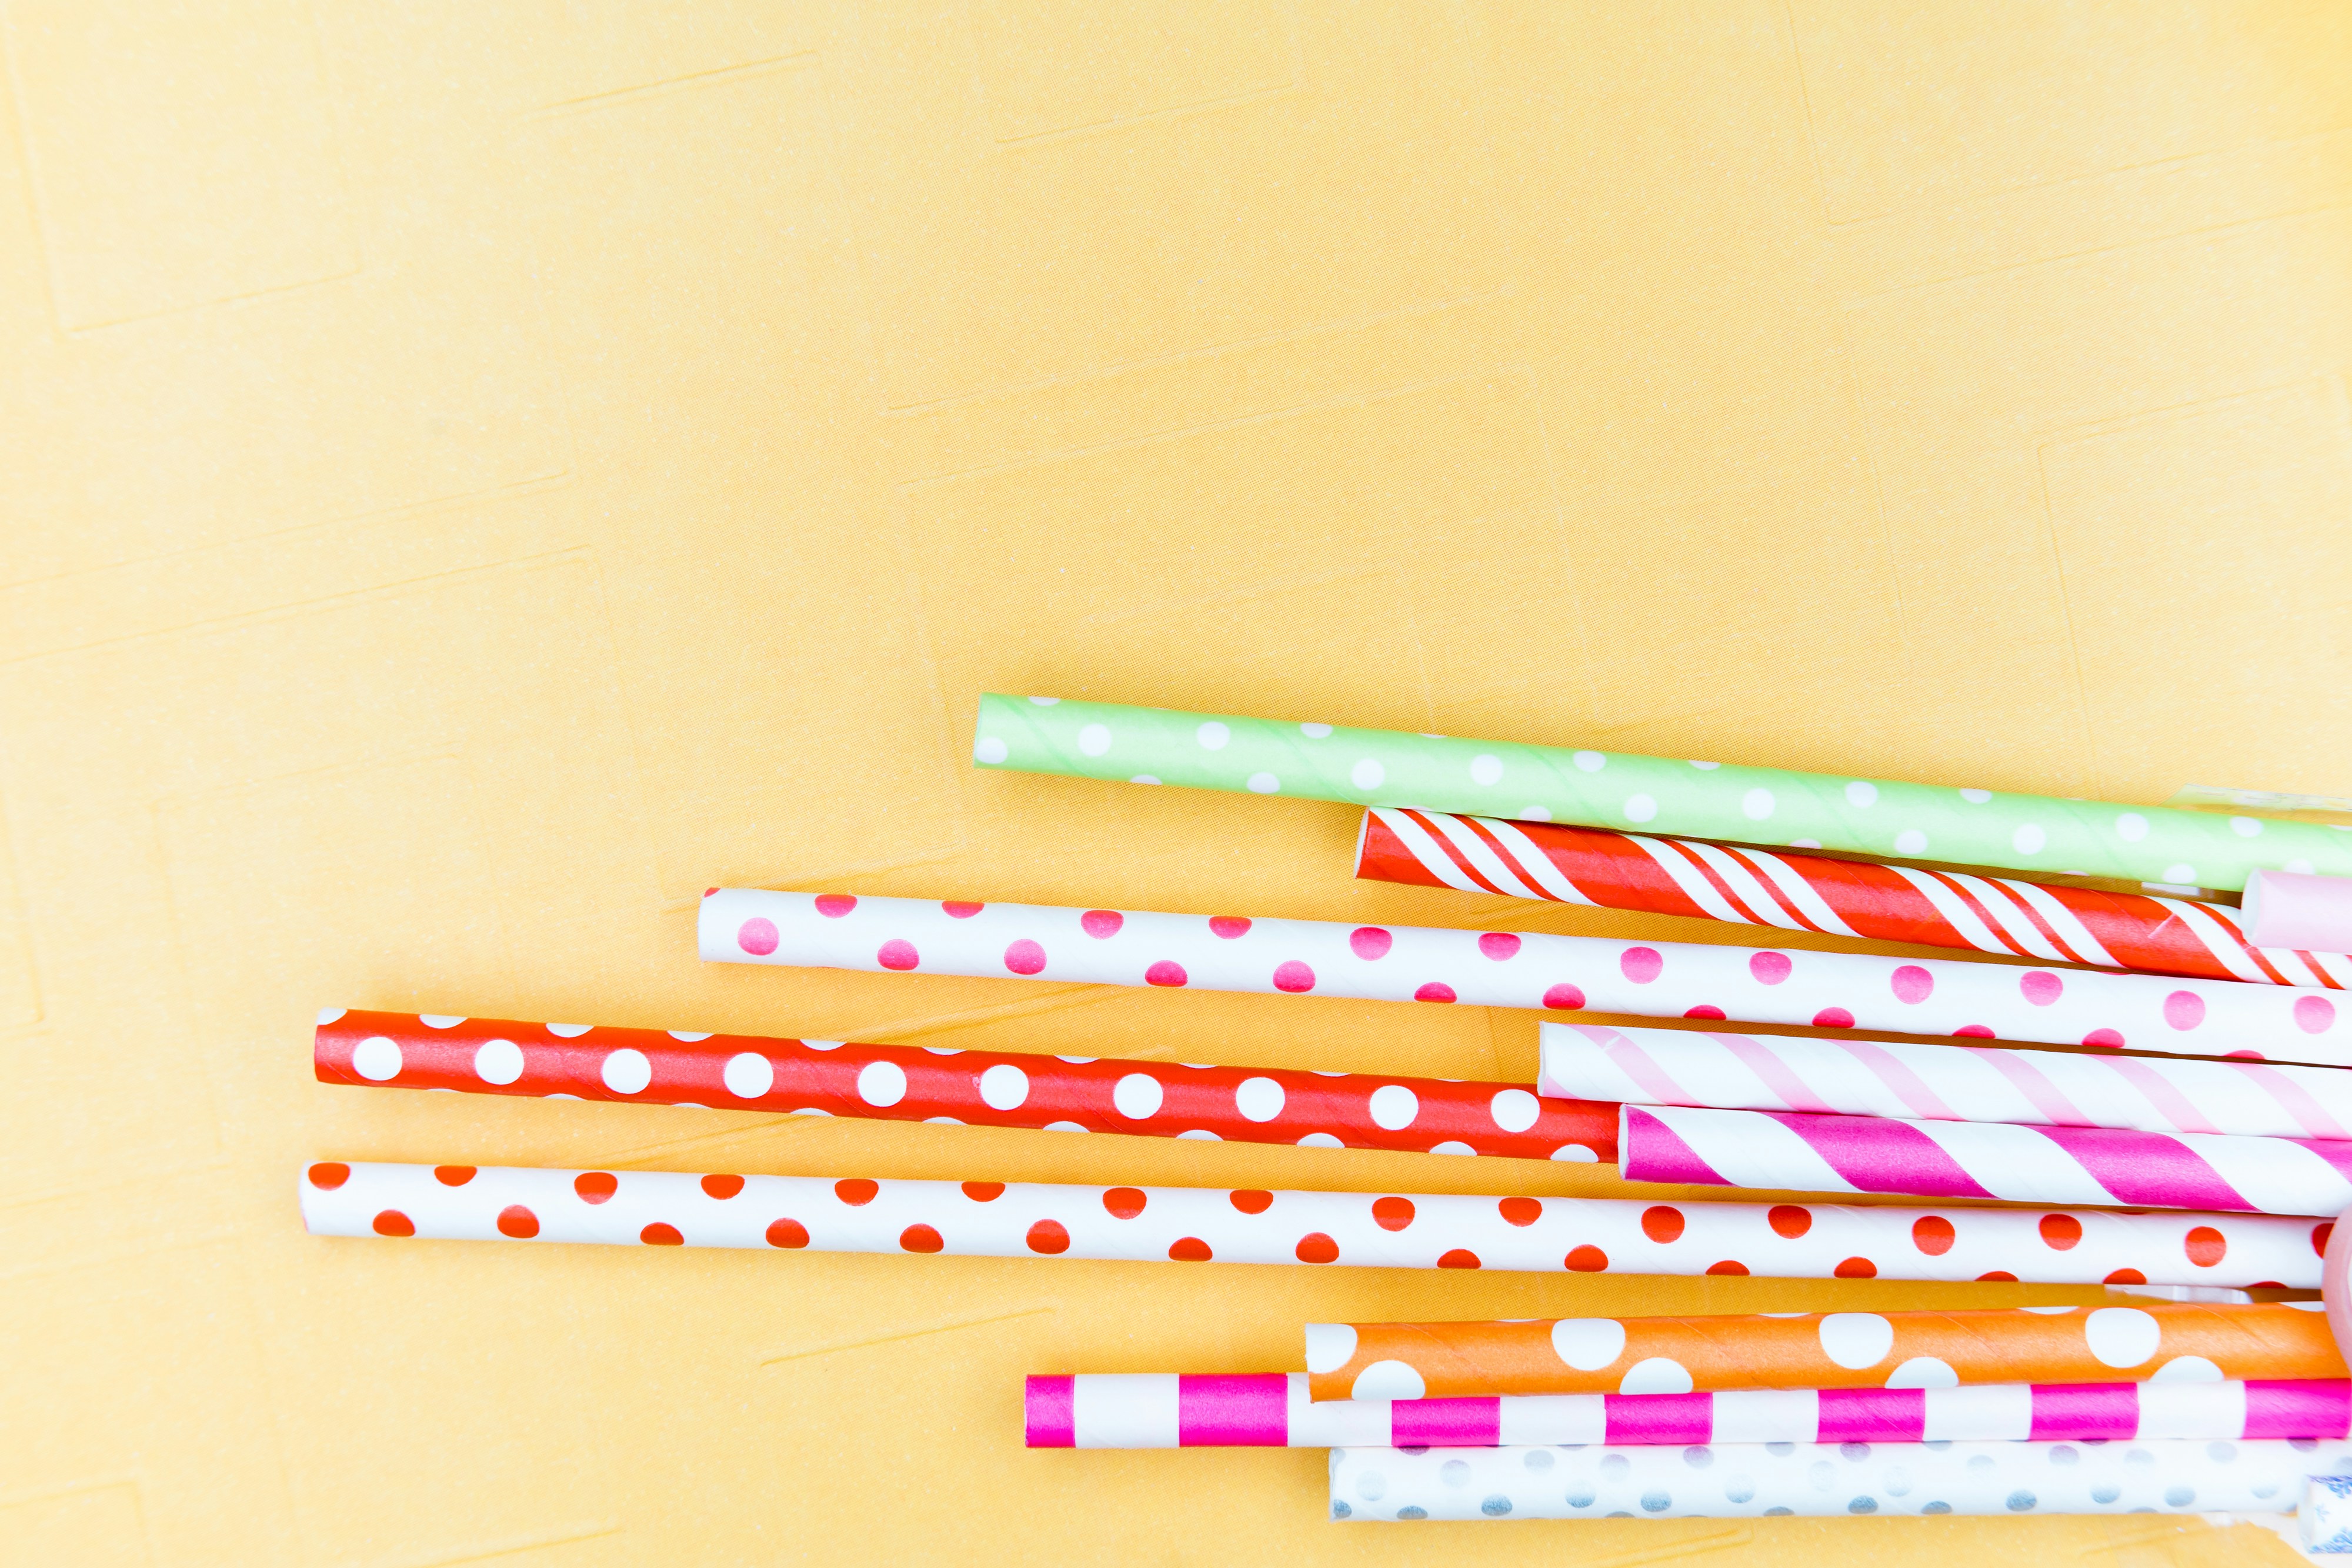 Italian Word of the Day: Cannuccia (drinking straw) - Daily Italian Words